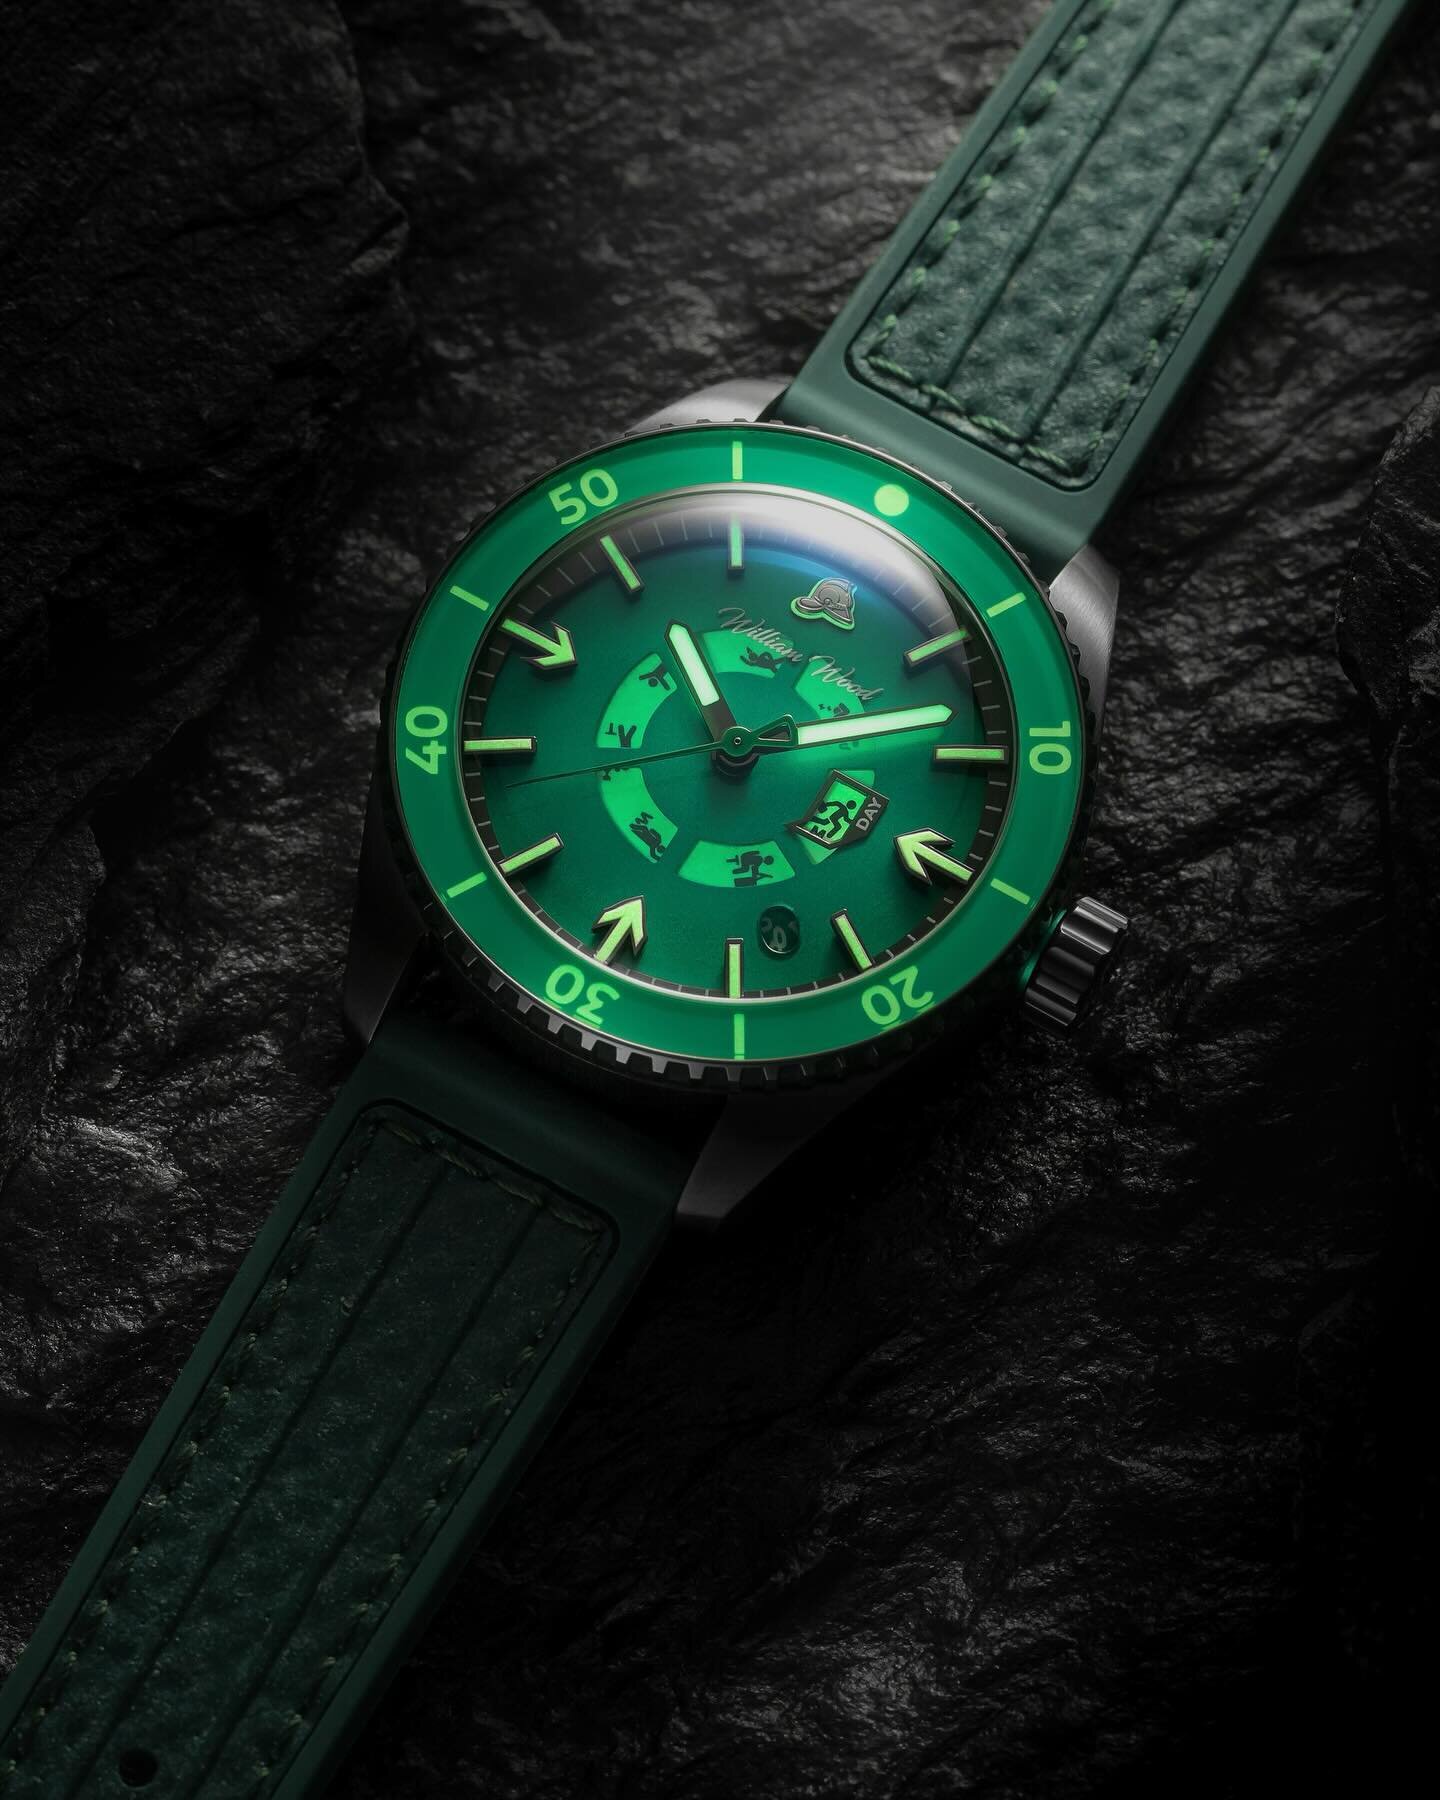 Launching at the @britishwatchmakers event today, the @williamwoodwatches Fire Exit.

A day-date with a lot of playful design elements, we included the man on the fire exit sign getting up to something different each day of the week. You can find out